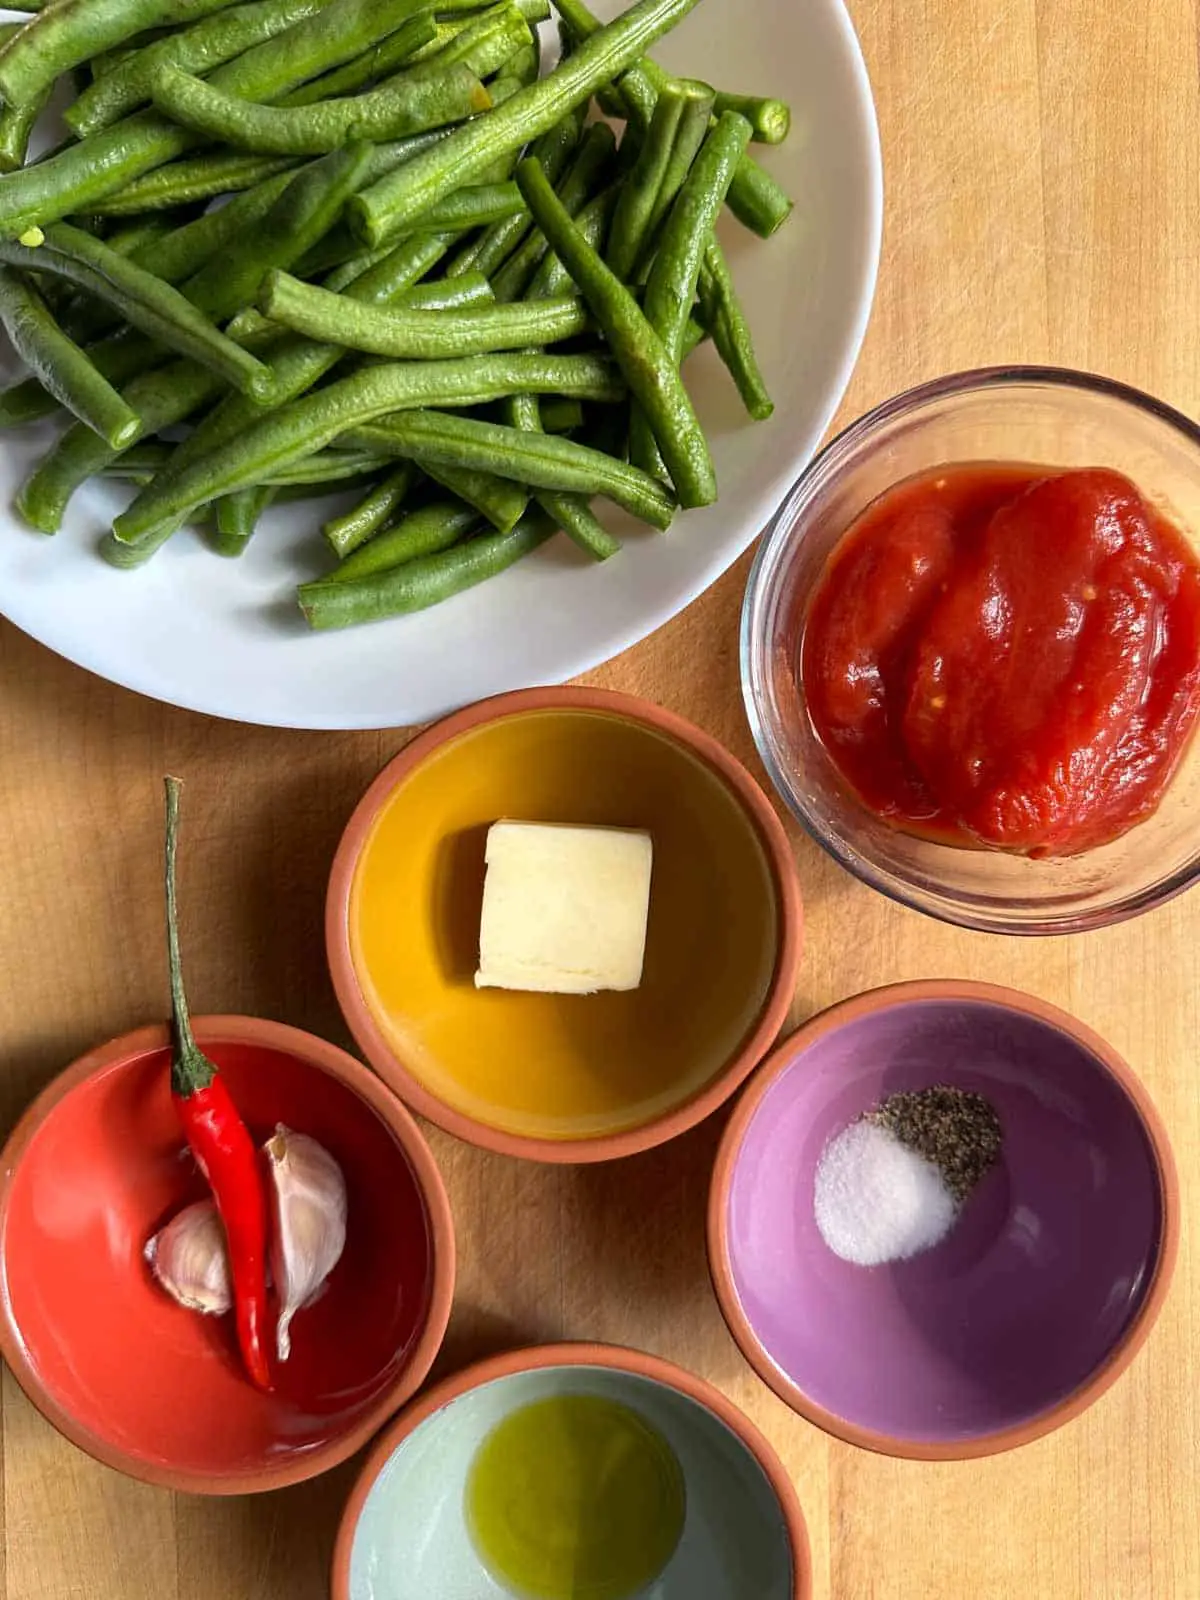 Green beans in a white bowl, and bowls containing Italian peeled tomatoes, butter, salt and pepper, olive oil, and garlic and chili.